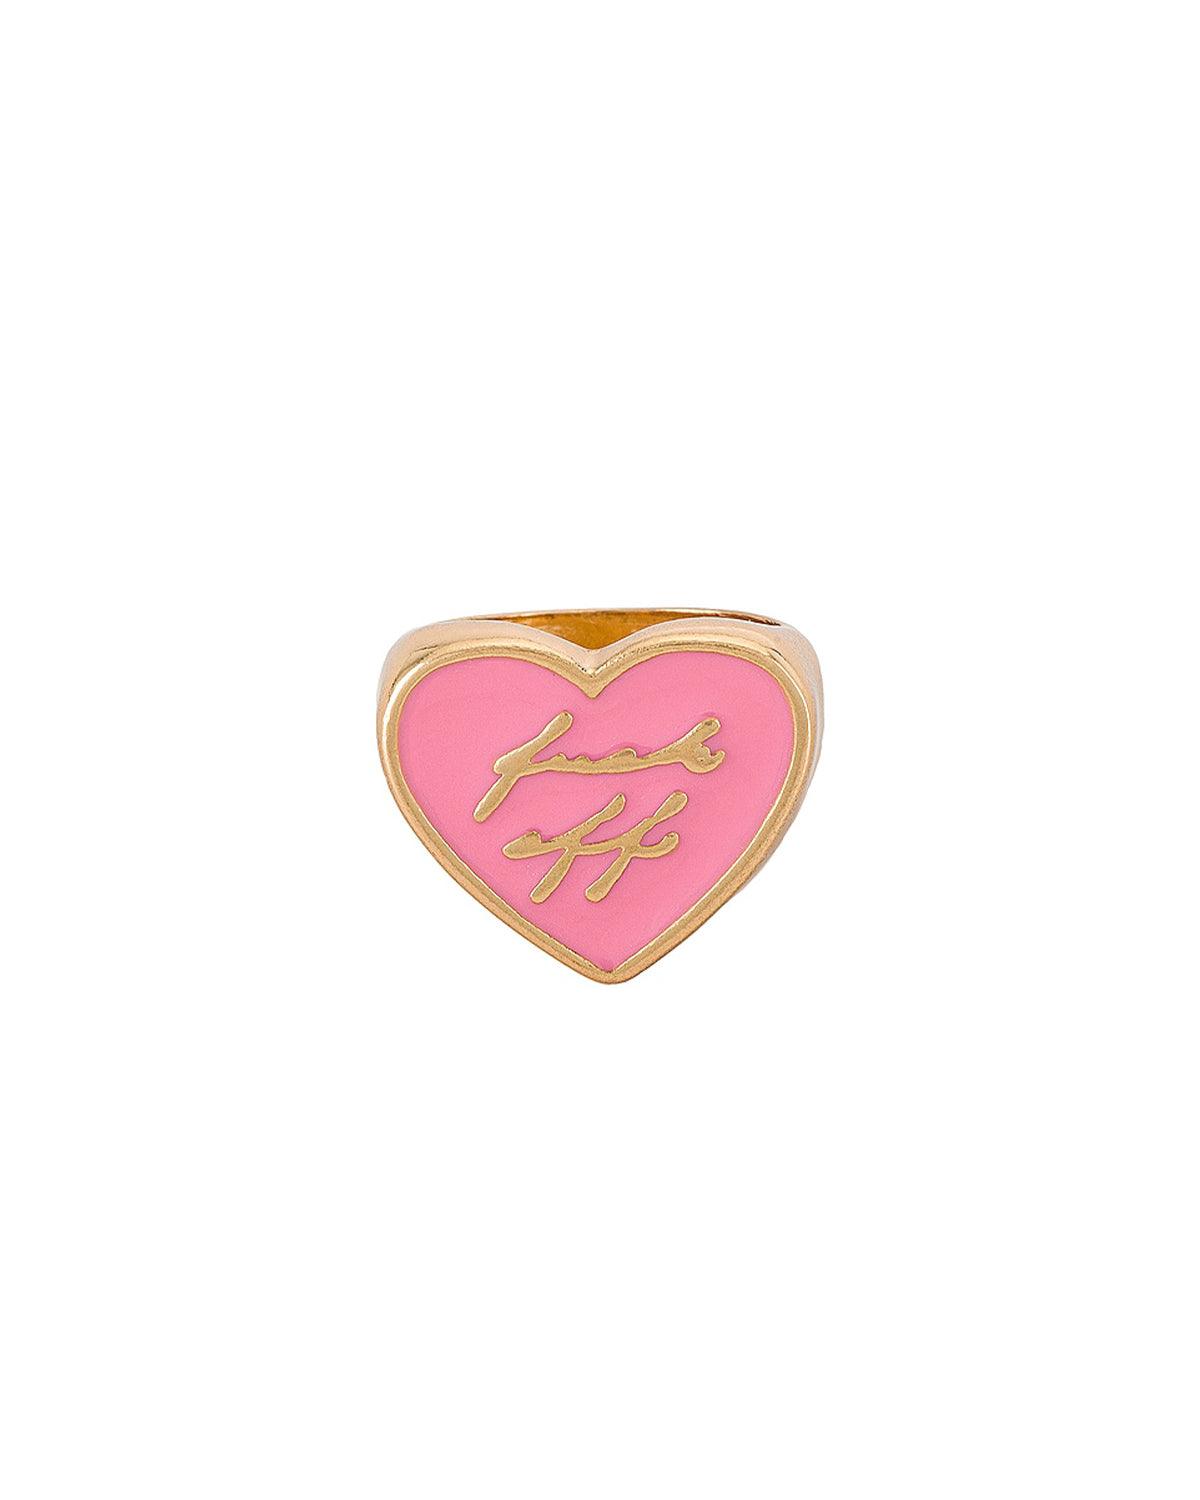 14k gold heart ring. Pink heart with the words 'Fuck off' engraved into the center. 